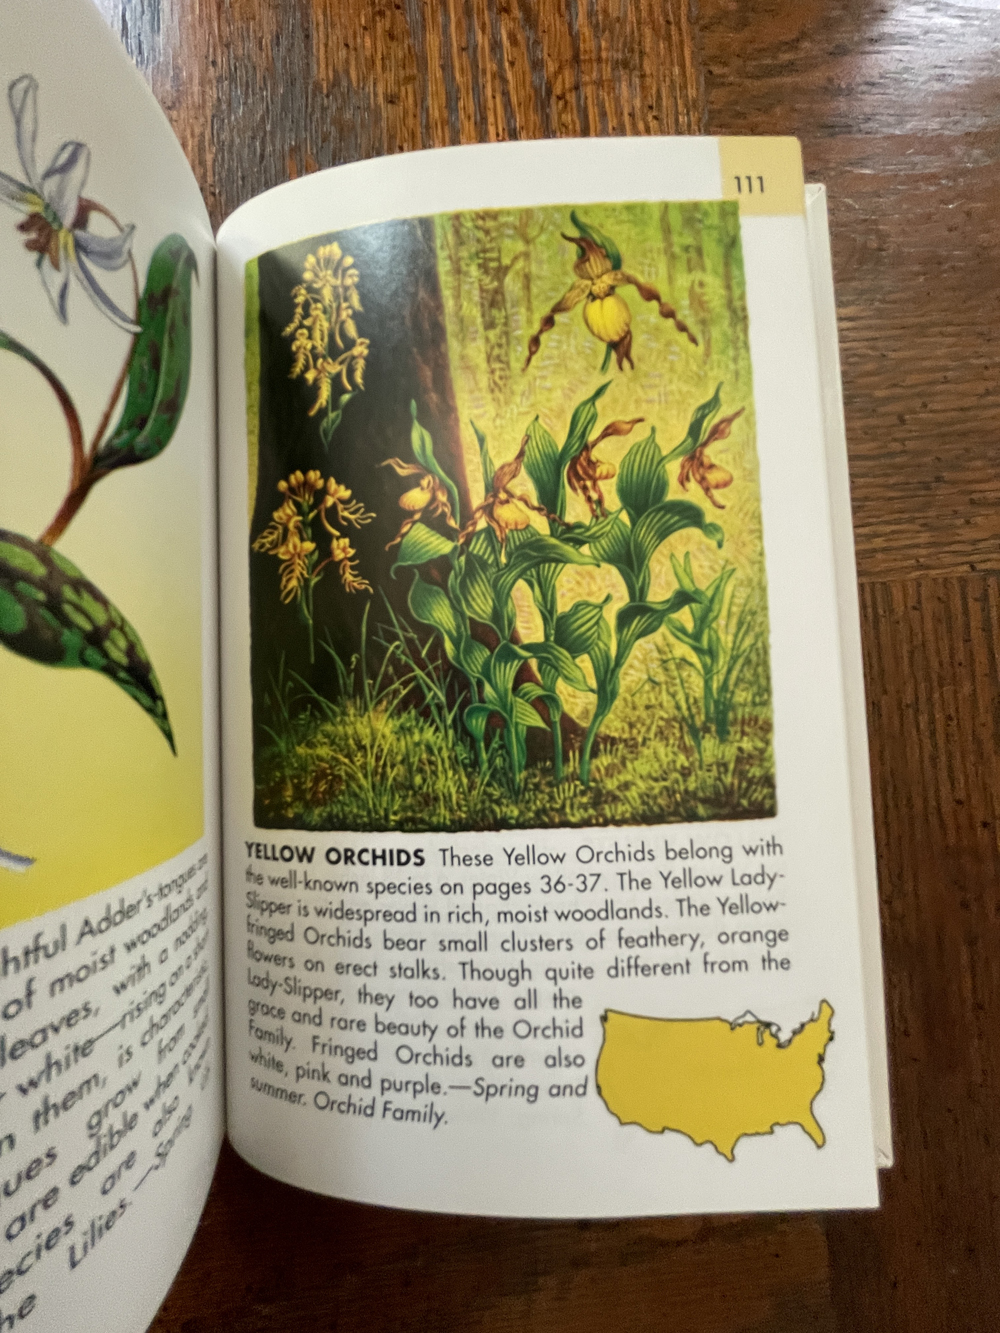 Yellow Orchids in Wildflowers: A Guide to Familiar American Flowers by Herbert S. Zim and Alexander C. Martin